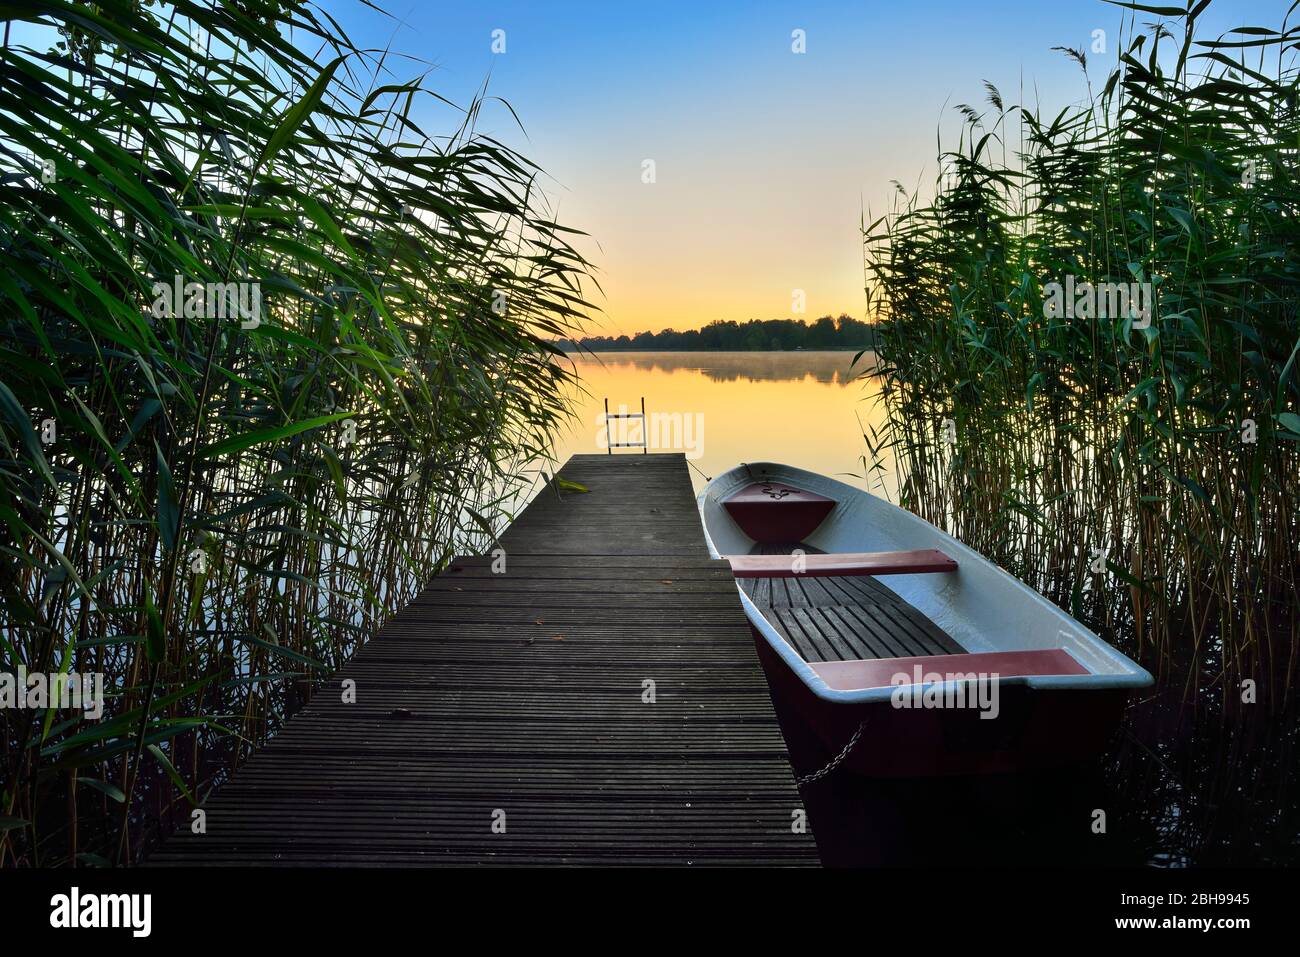 Jetty with rowing boat in the reeds, morning light, Lake Großer Müllroser See, Müllrose, Schlaubetal Nature Park, Brandenburg, Germany Stock Photo